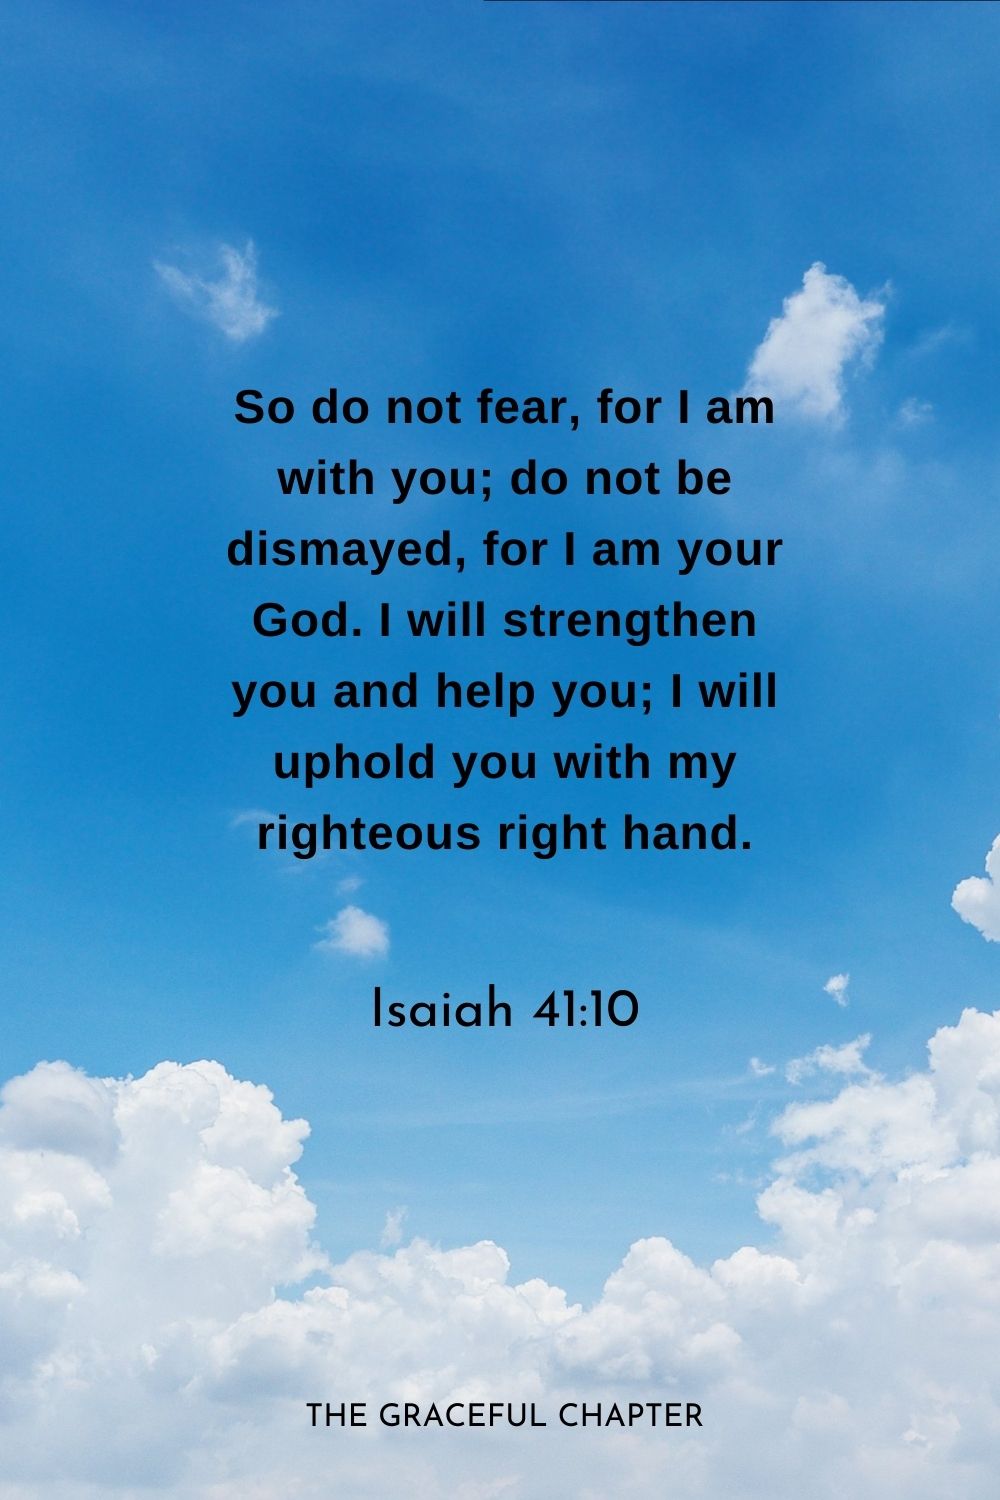 So do not fear, for I am with you; do not be dismayed, for I am your God. I will strengthen you and help you; I will uphold you with my righteous right hand.